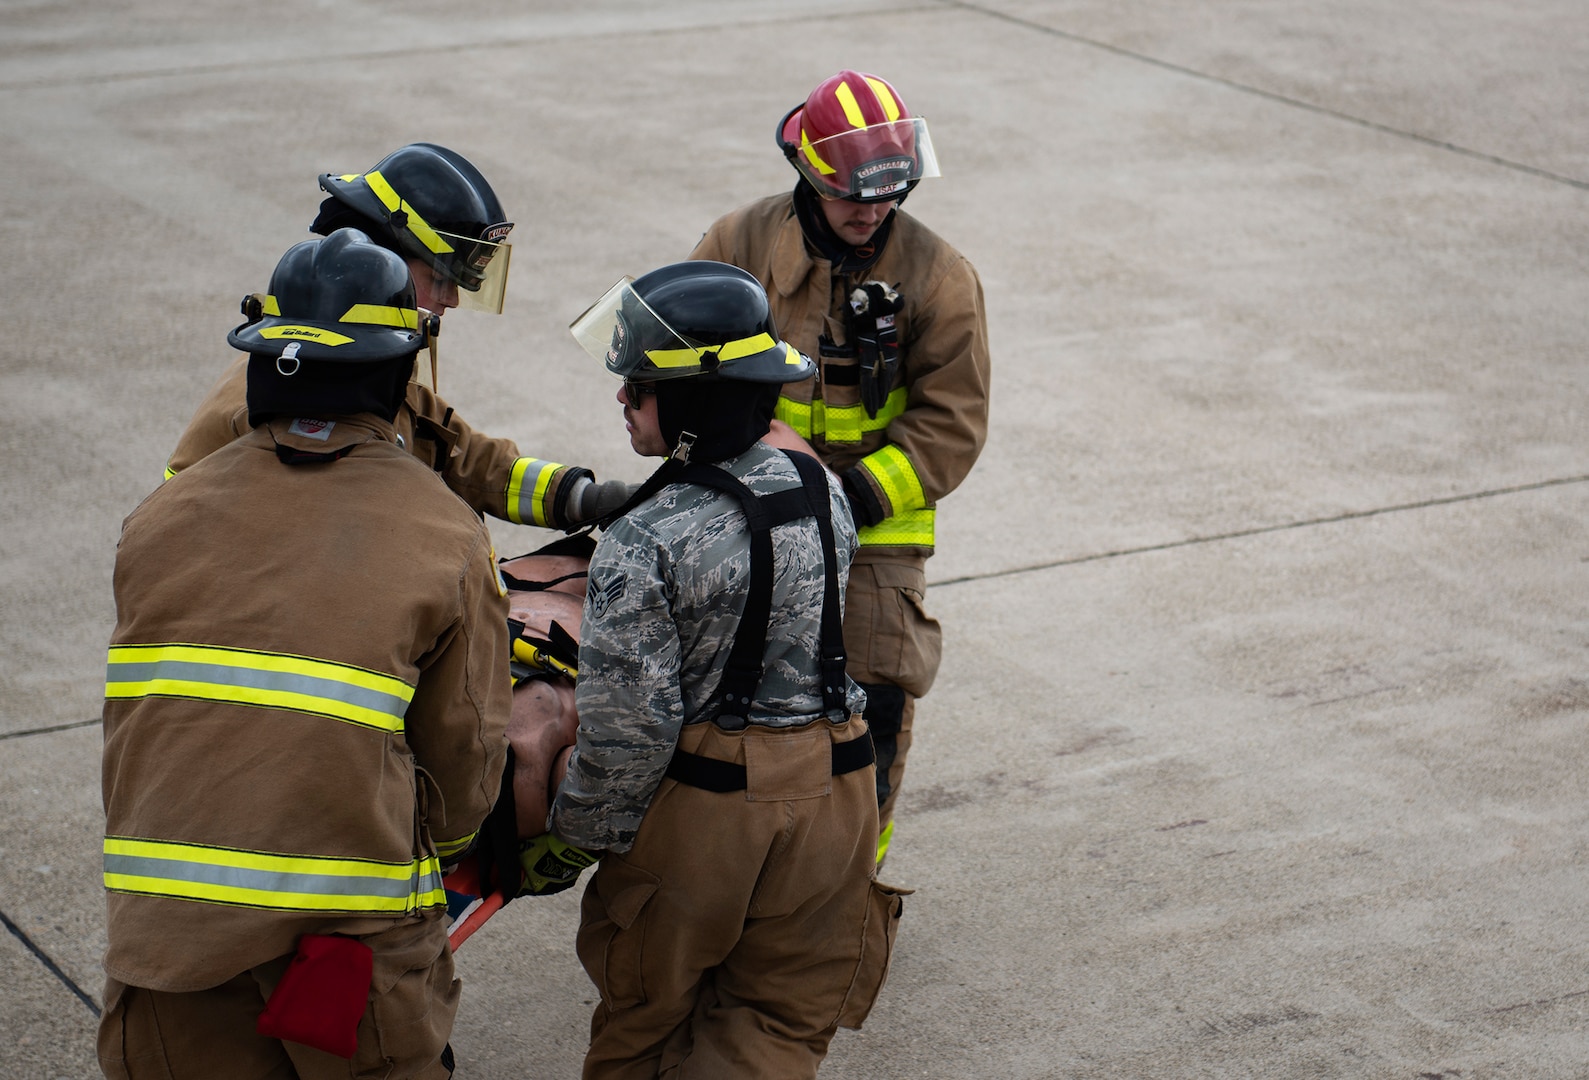 8th CES Firefighters Execute Life-saving Training